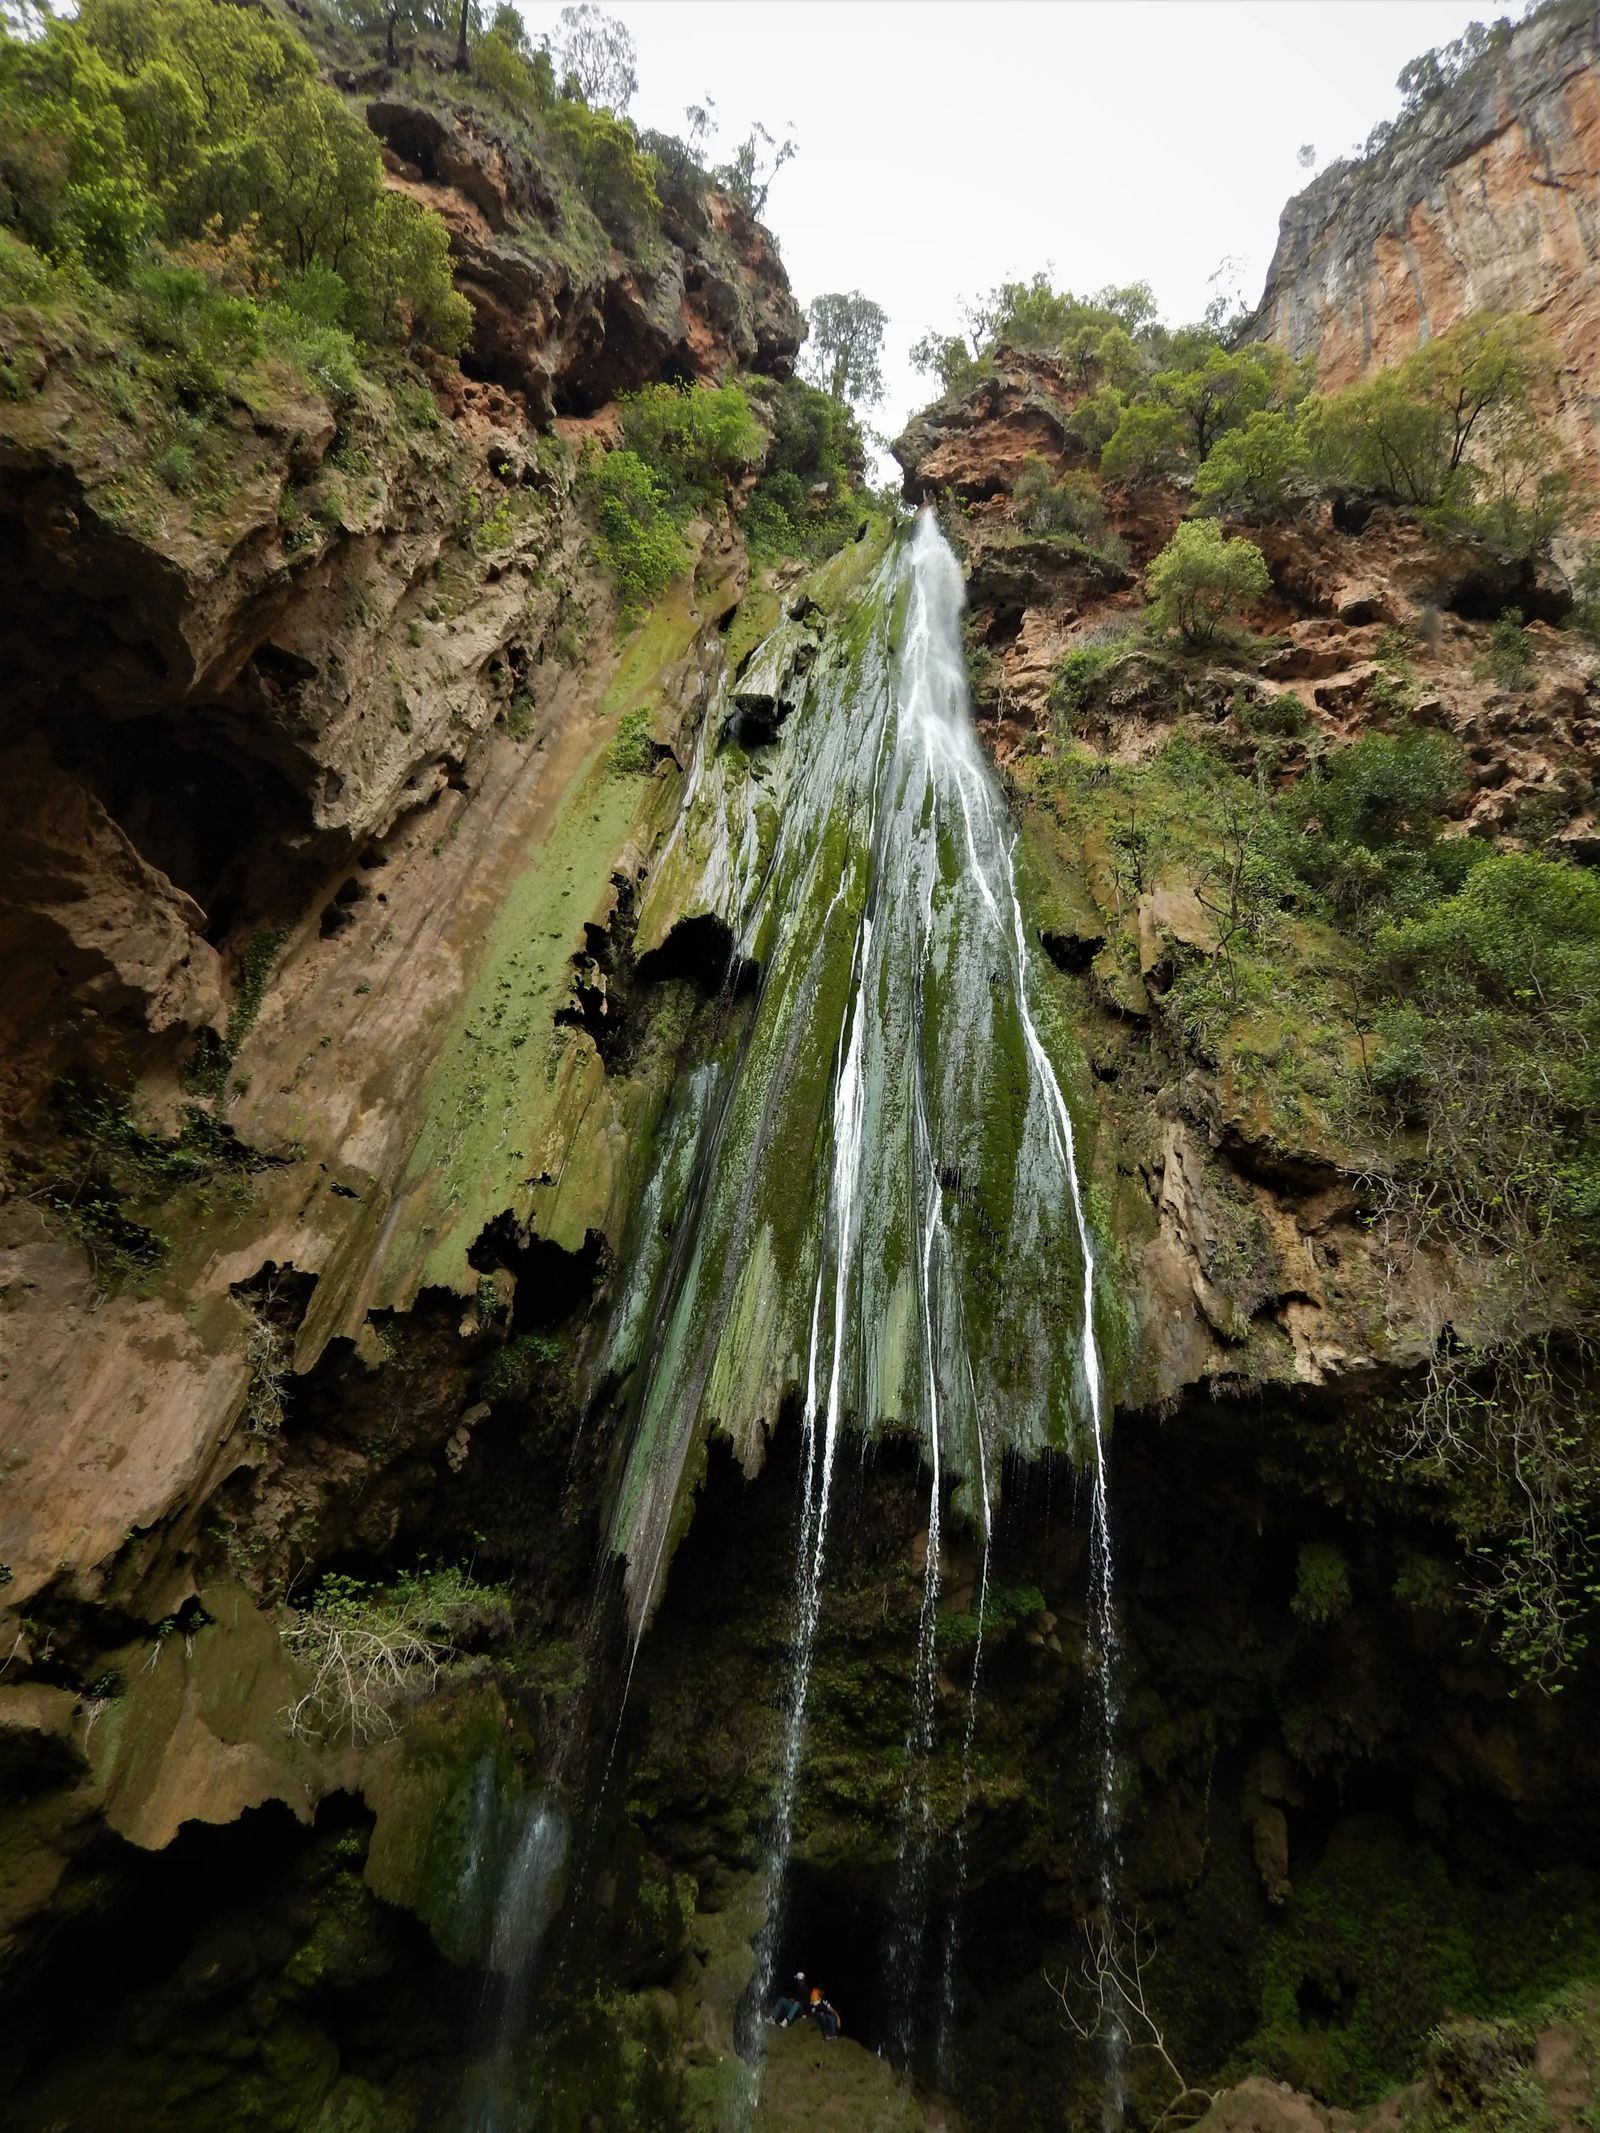 Hiking to Akchour Waterfalls in Morocco